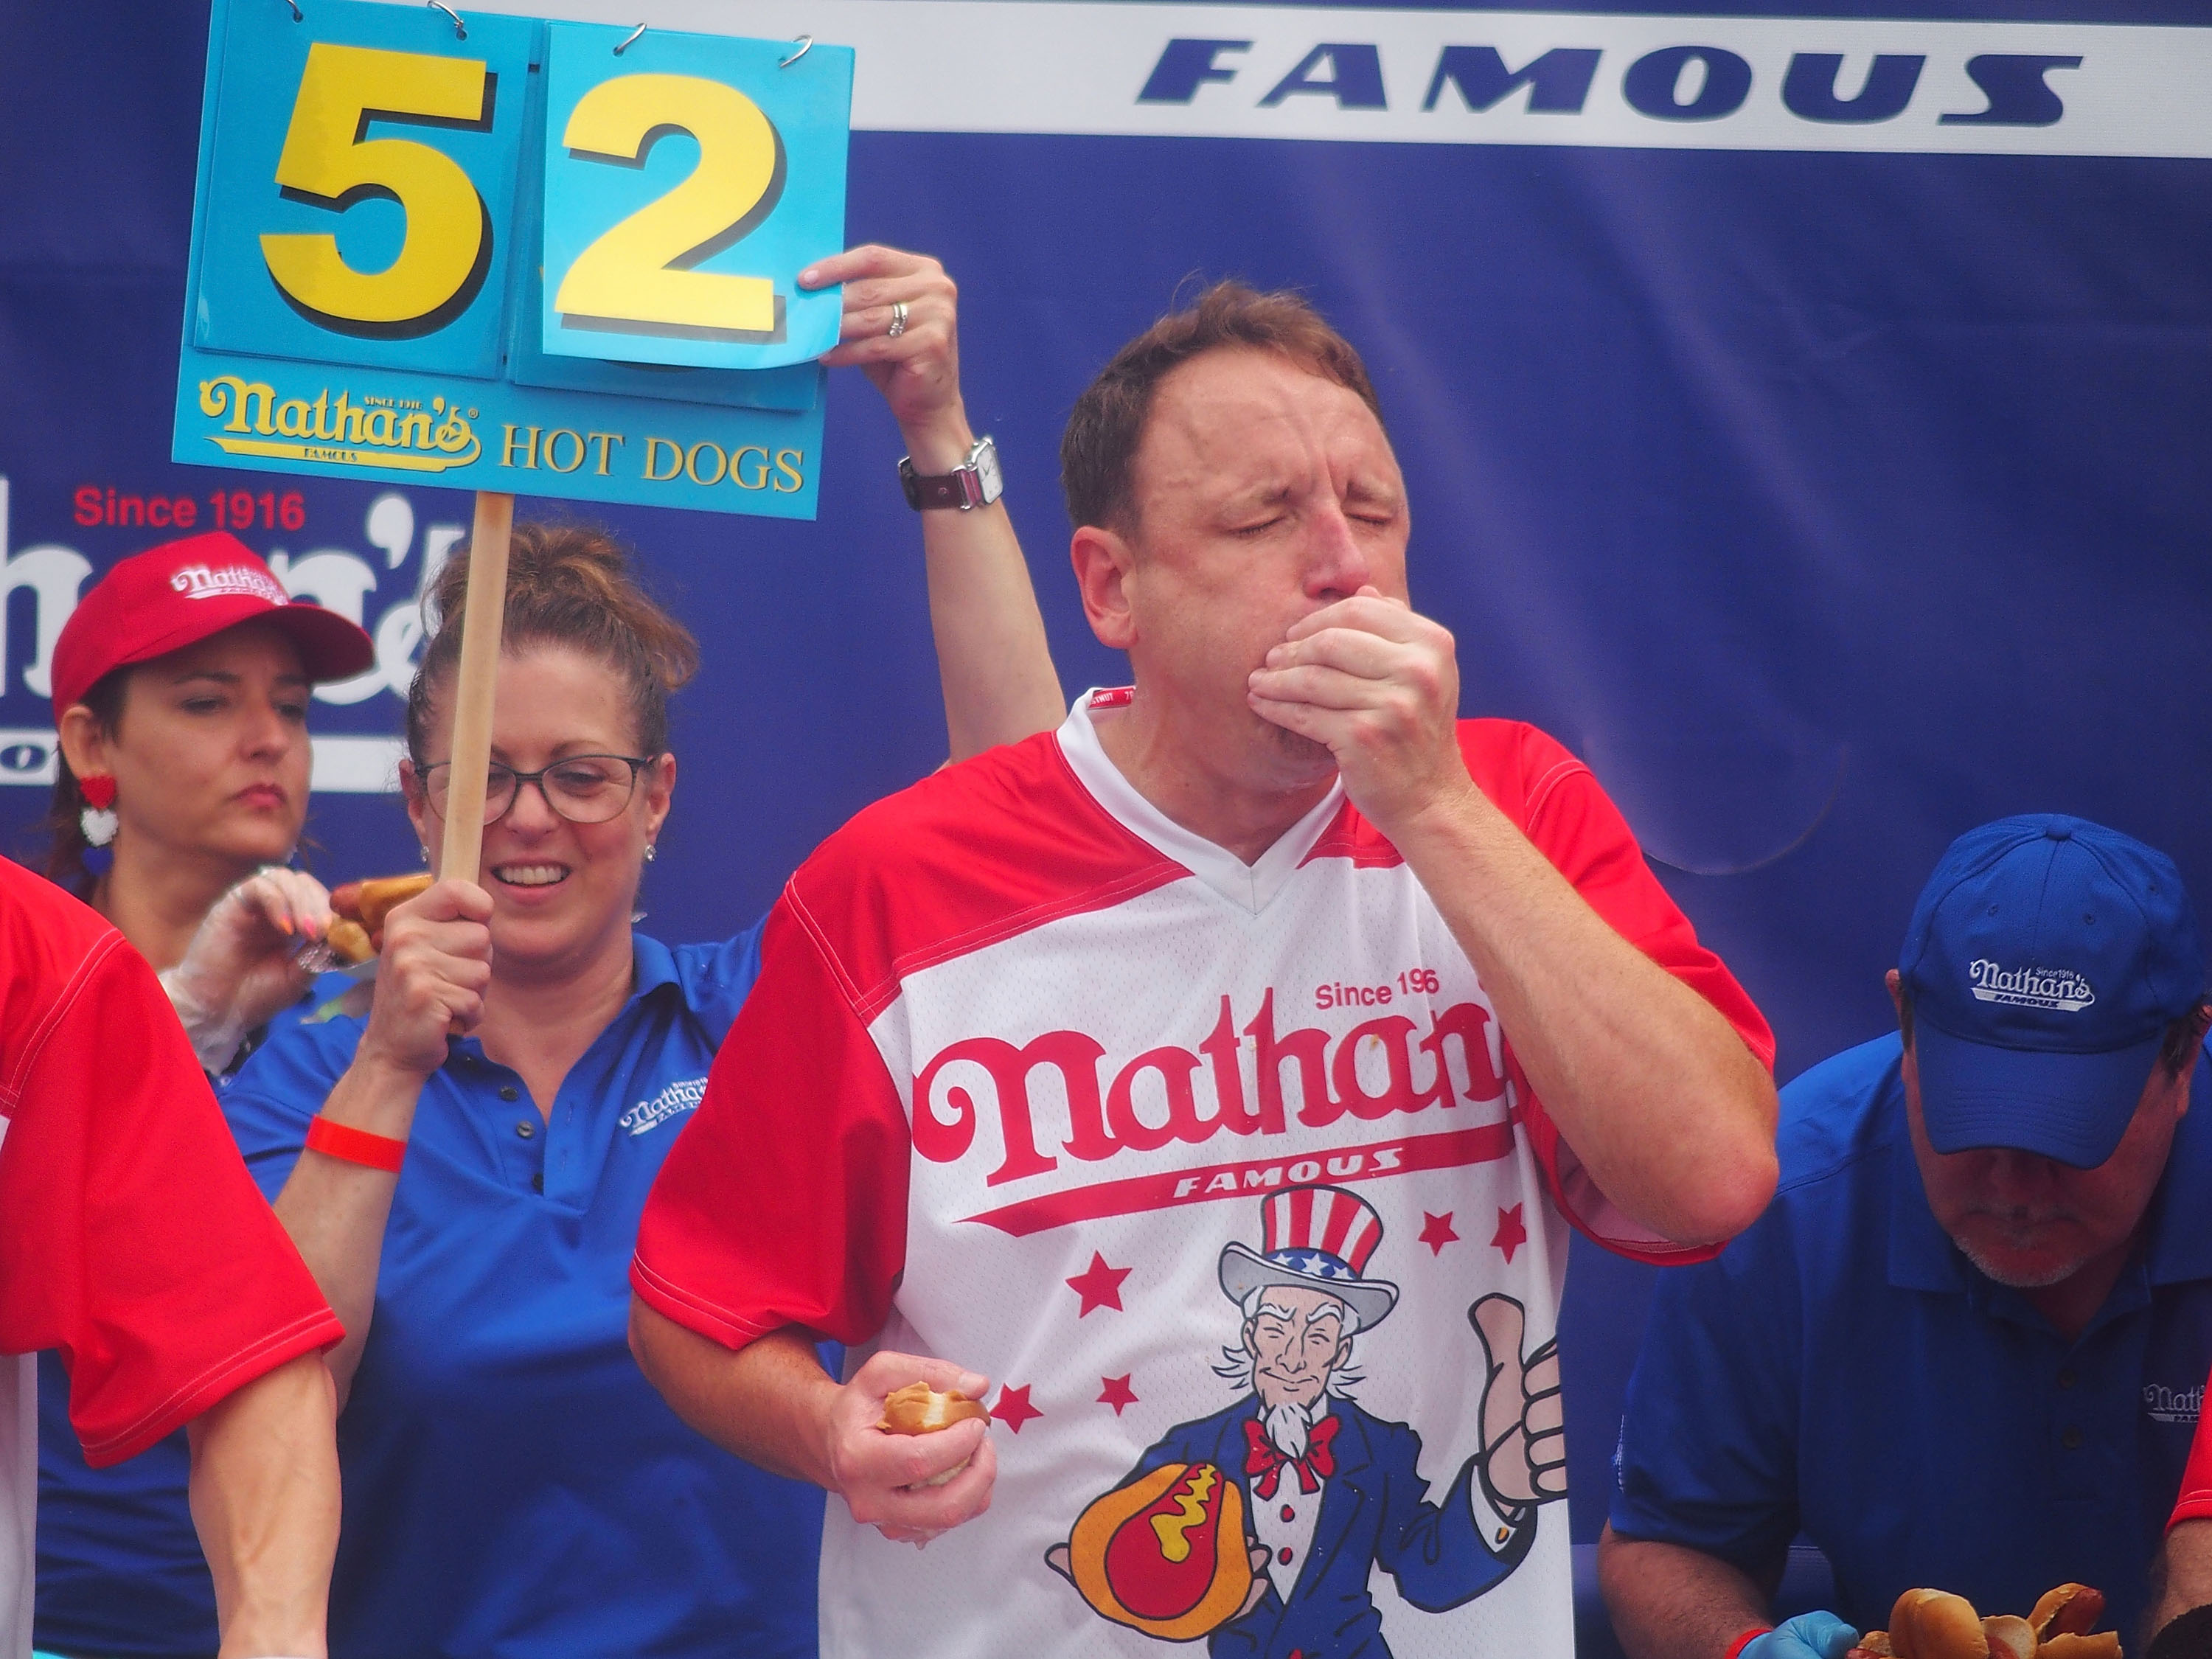 Defending champion Joey Chestnut competes in the 2023 Nathan's Famous International Hot Dog Eating Contest at Coney Island on July 4, 2023 in New York City.